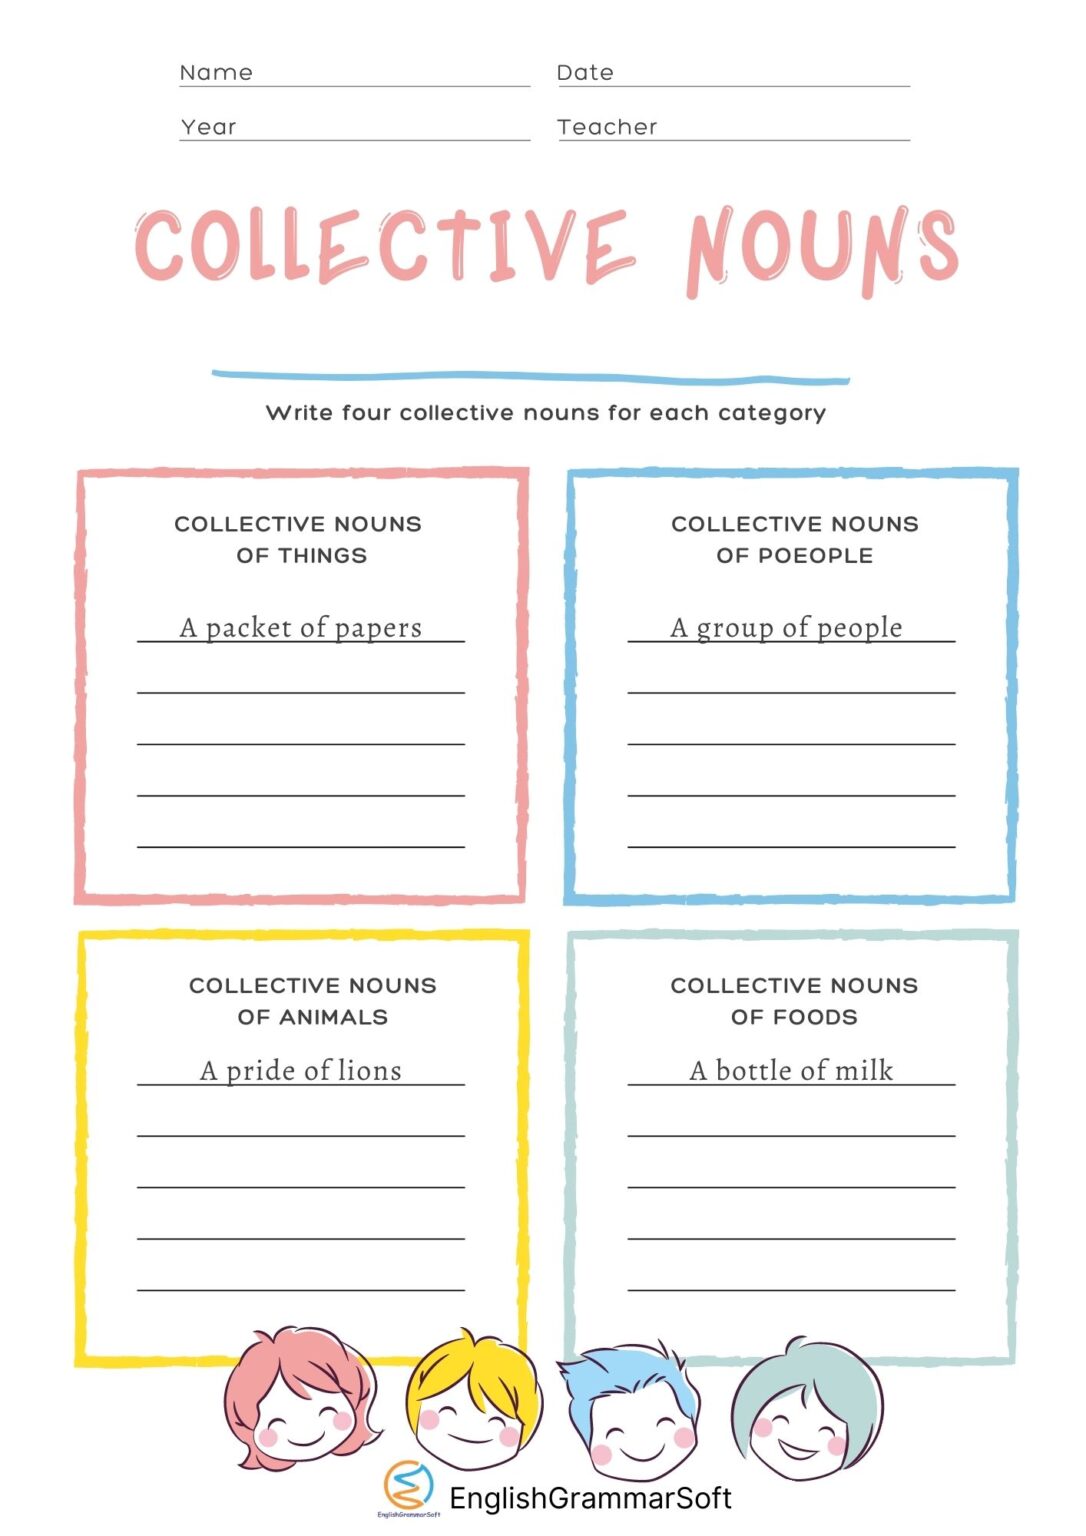 free-printable-collective-nouns-worksheet-with-answers-englishgrammarsoft